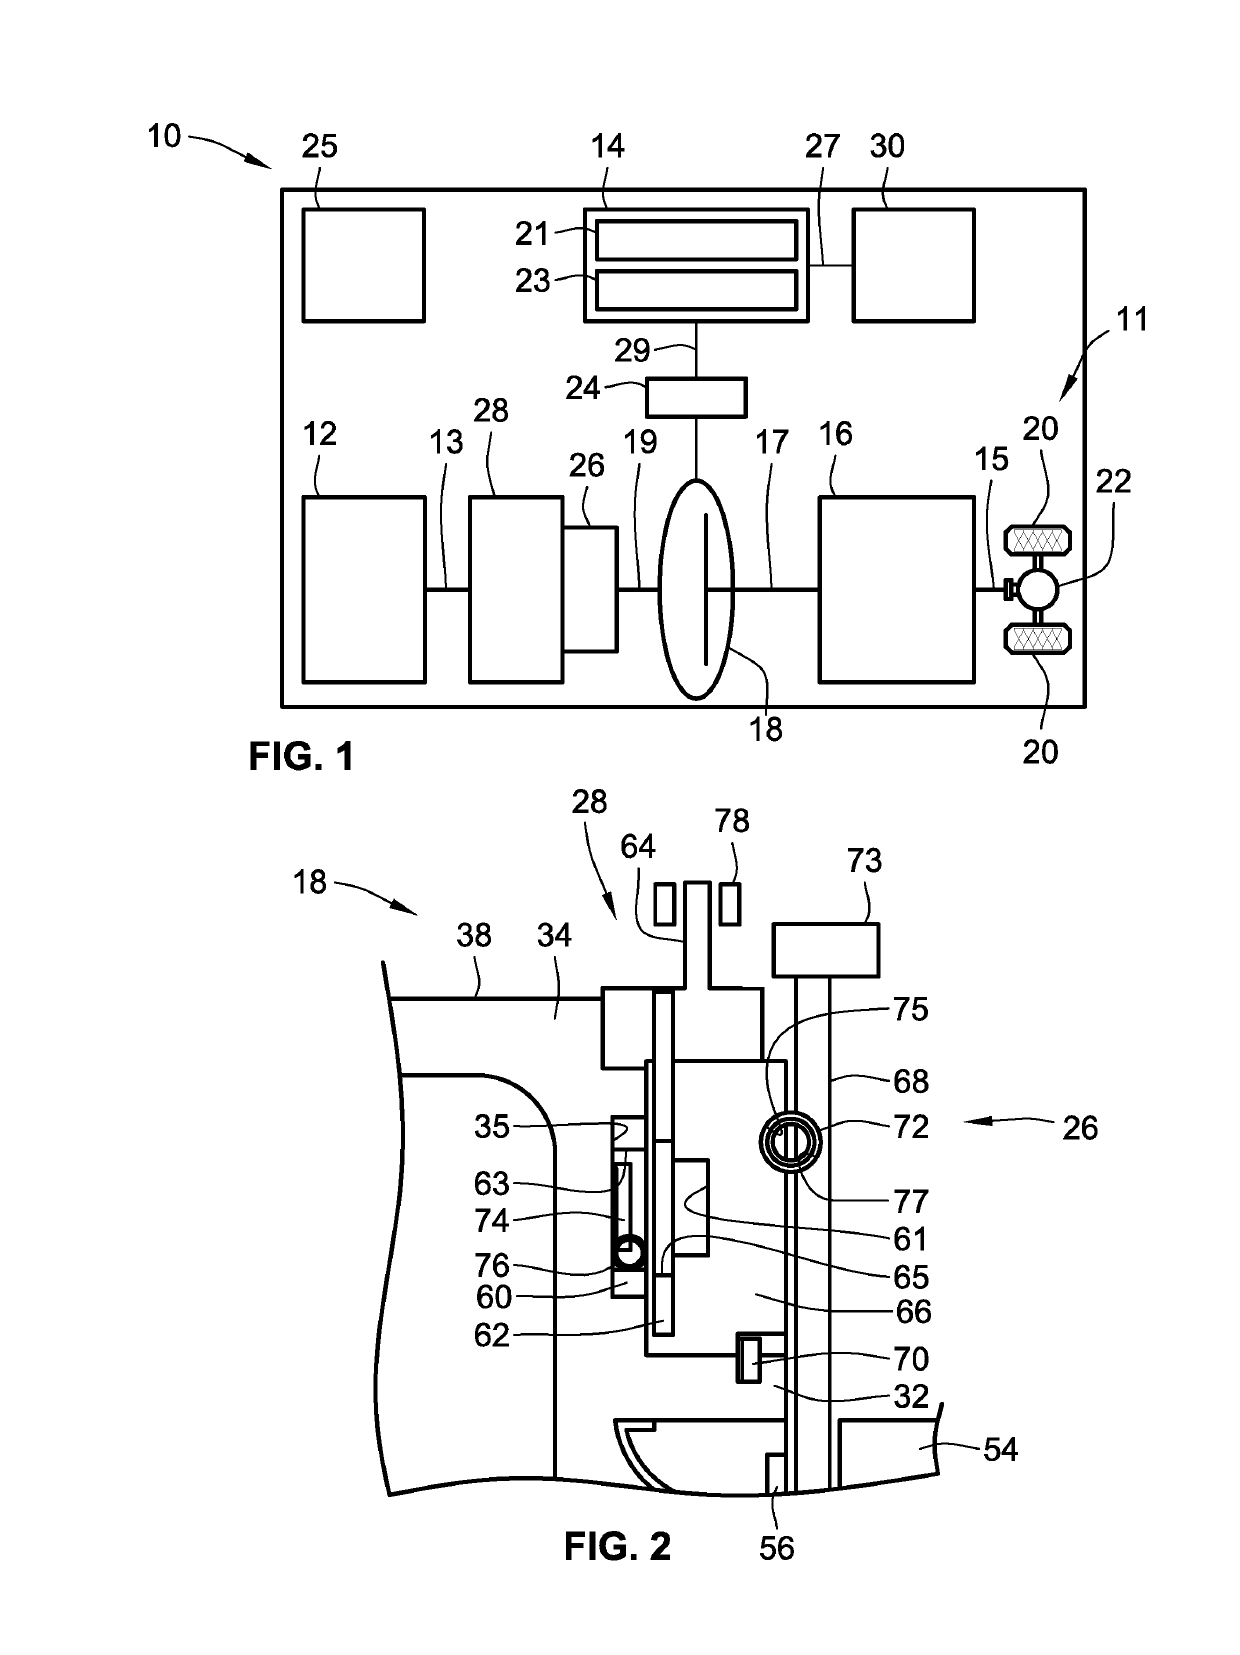 Multi-mode engine-disconnect clutch assemblies and control logic for hybrid electric vehicles